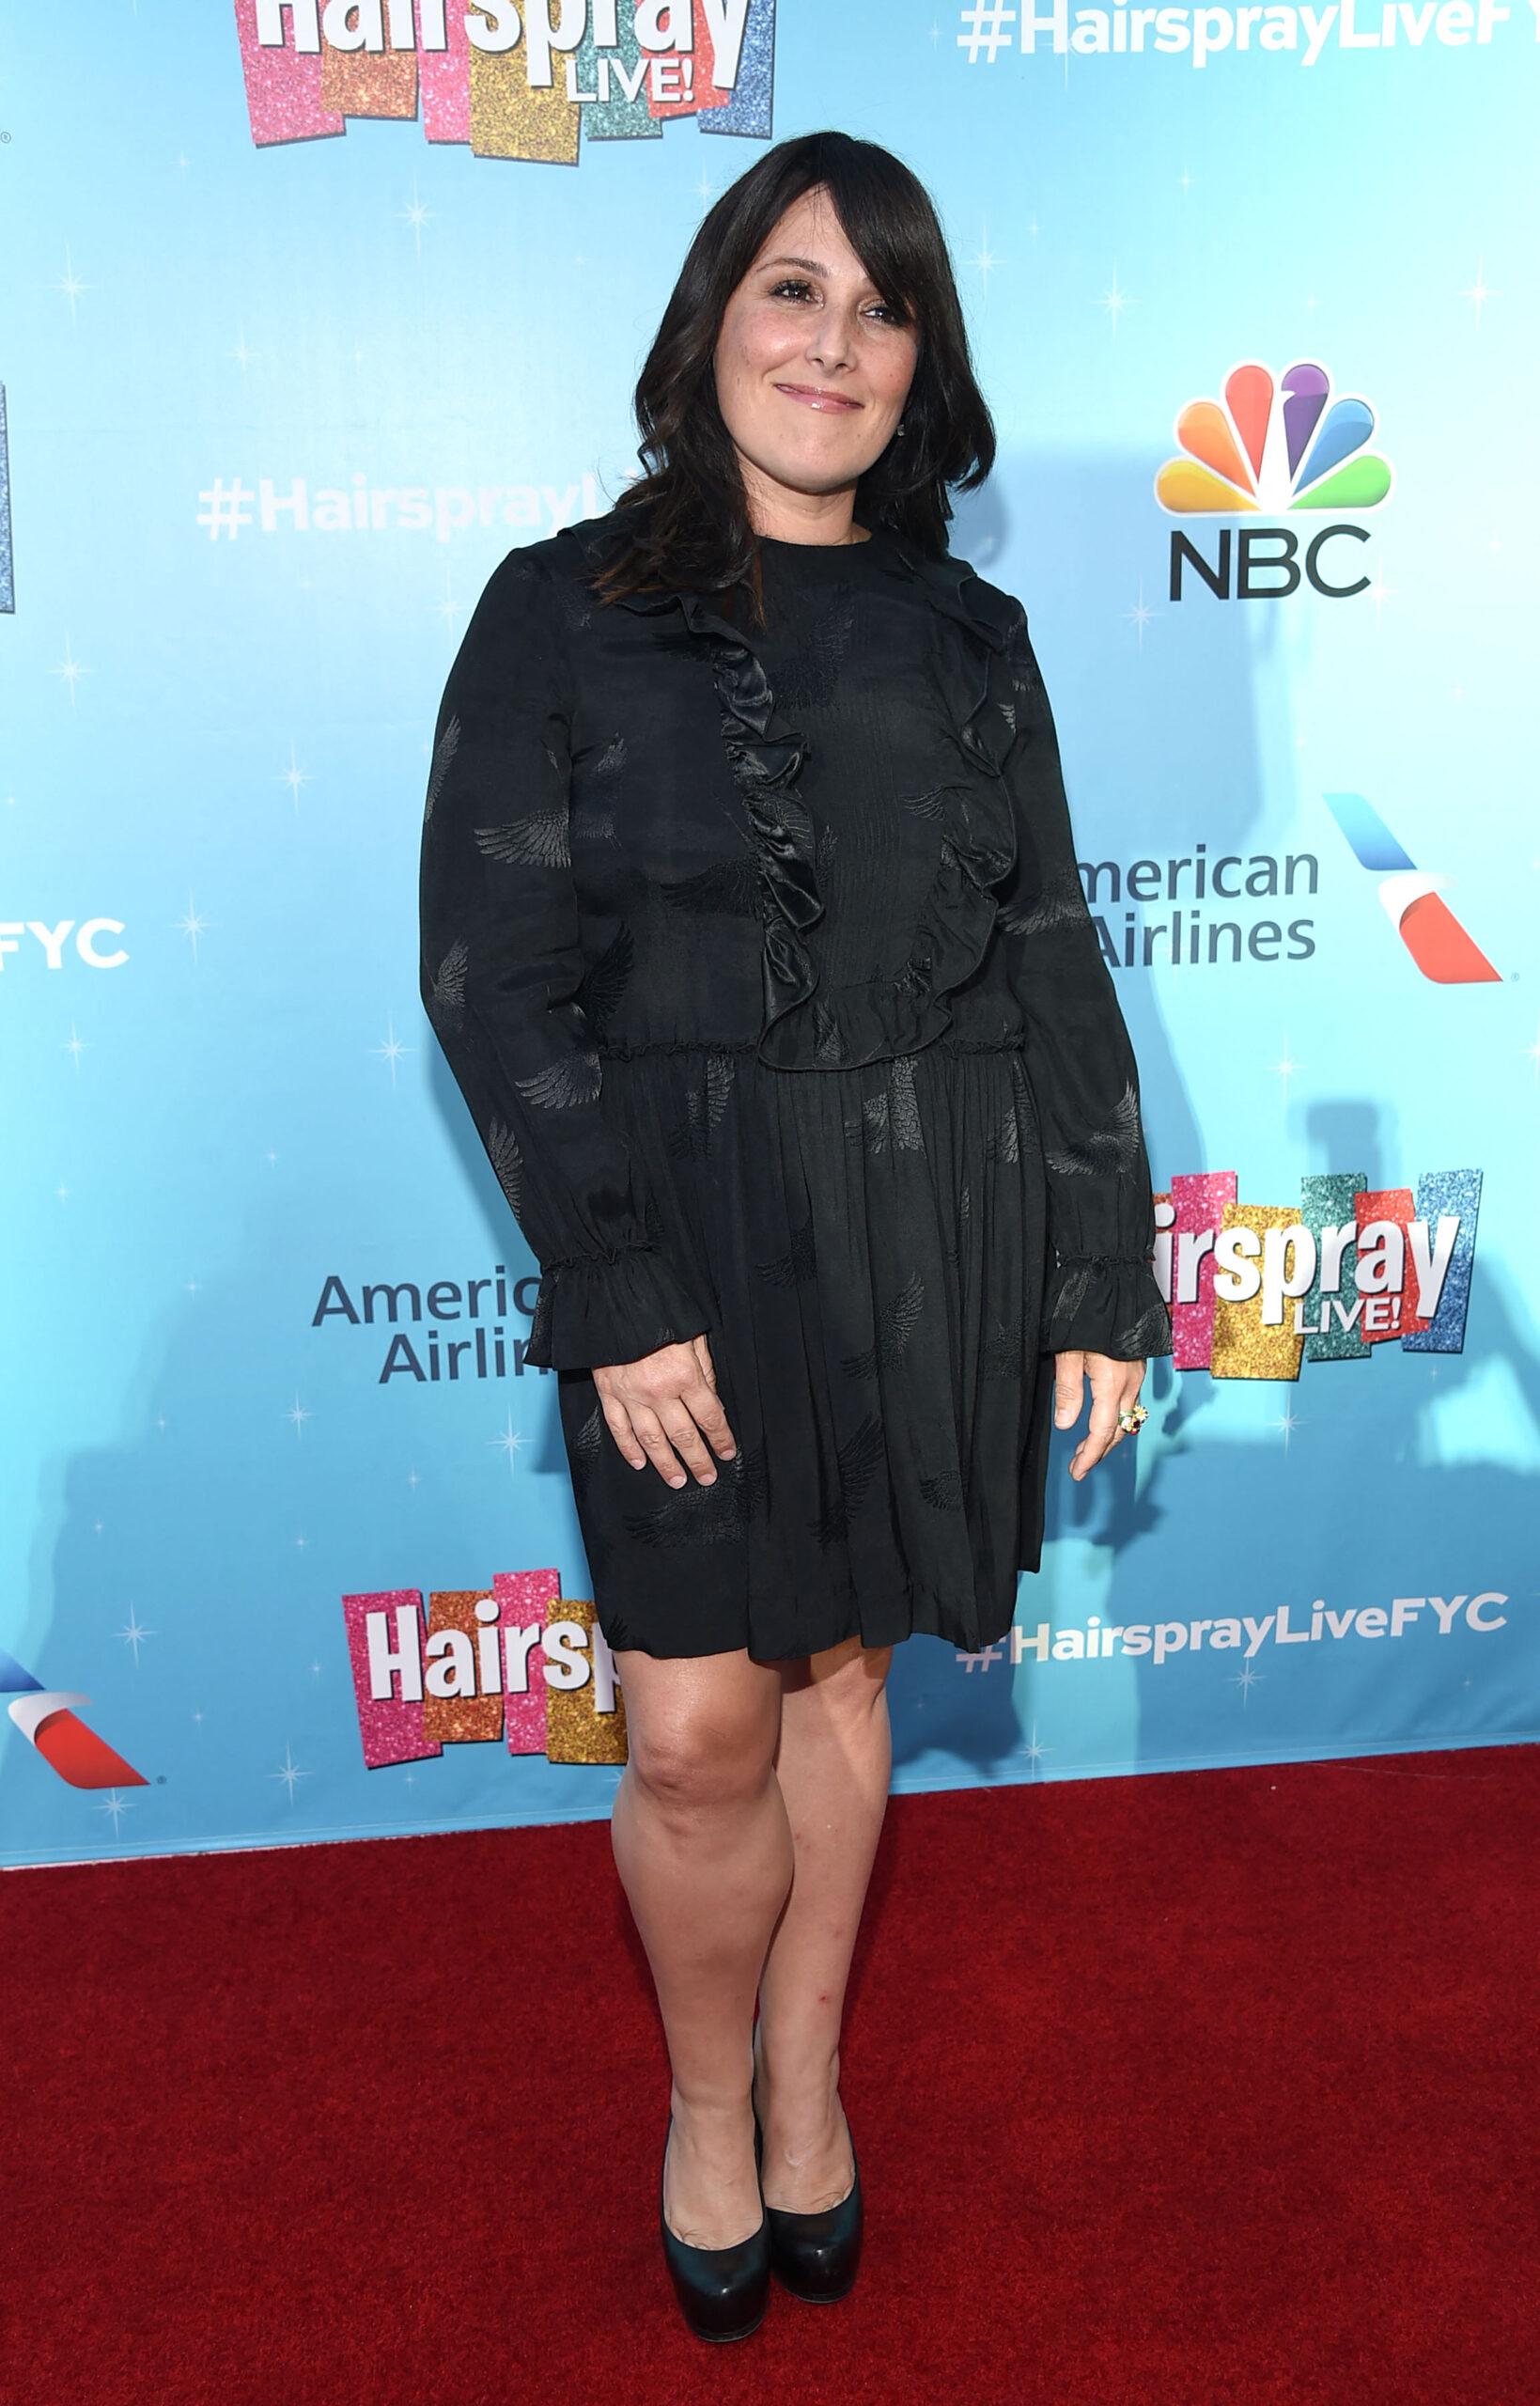 Ricki Lake at the 'Hairspray' live FYC event in Hollywood